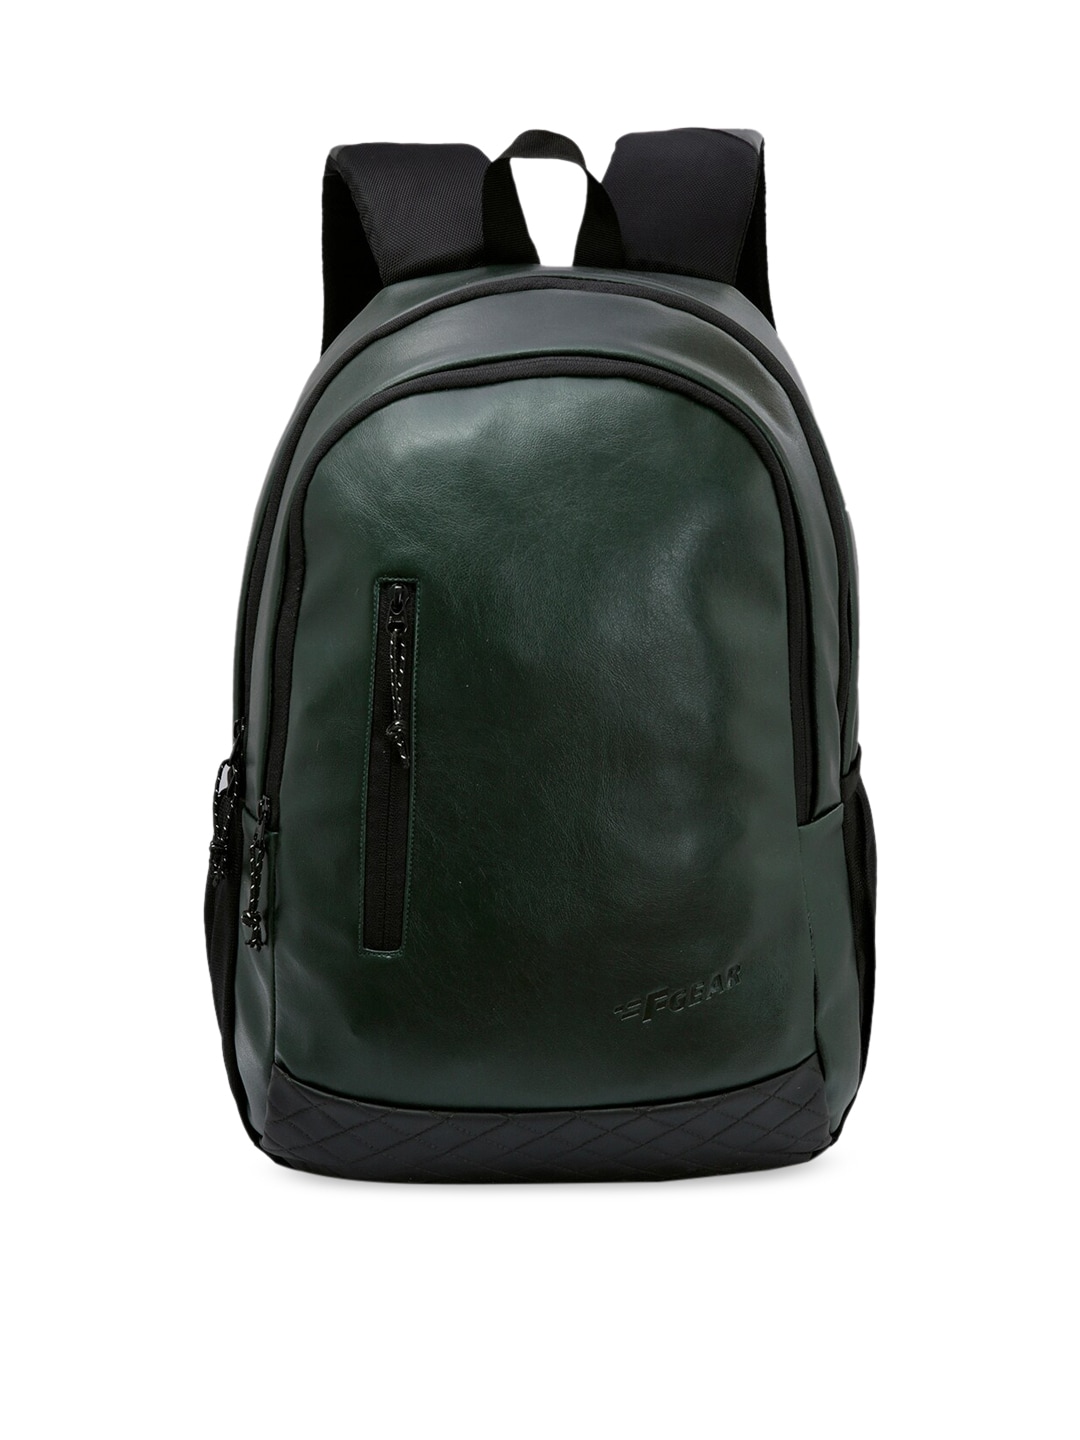 F Gear Adult Green & Black Colourblocked Backpack Price in India